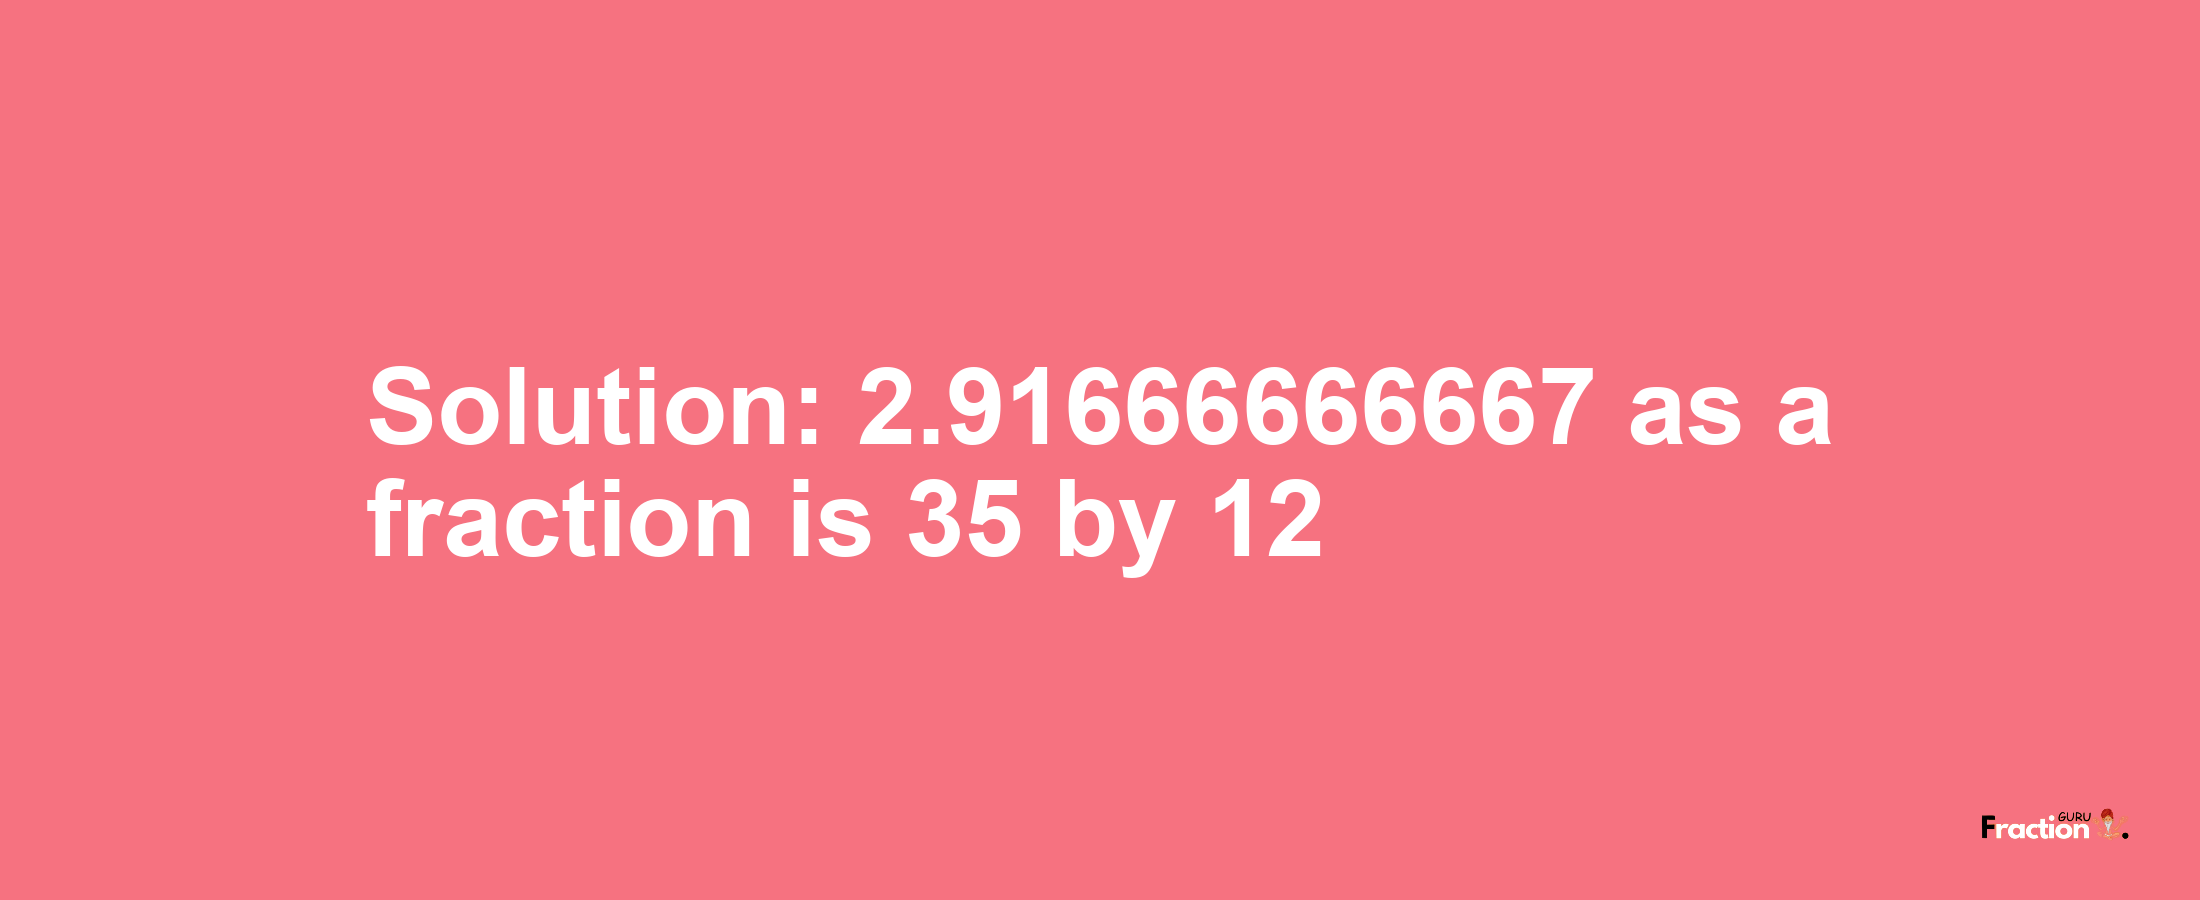 Solution:2.91666666667 as a fraction is 35/12